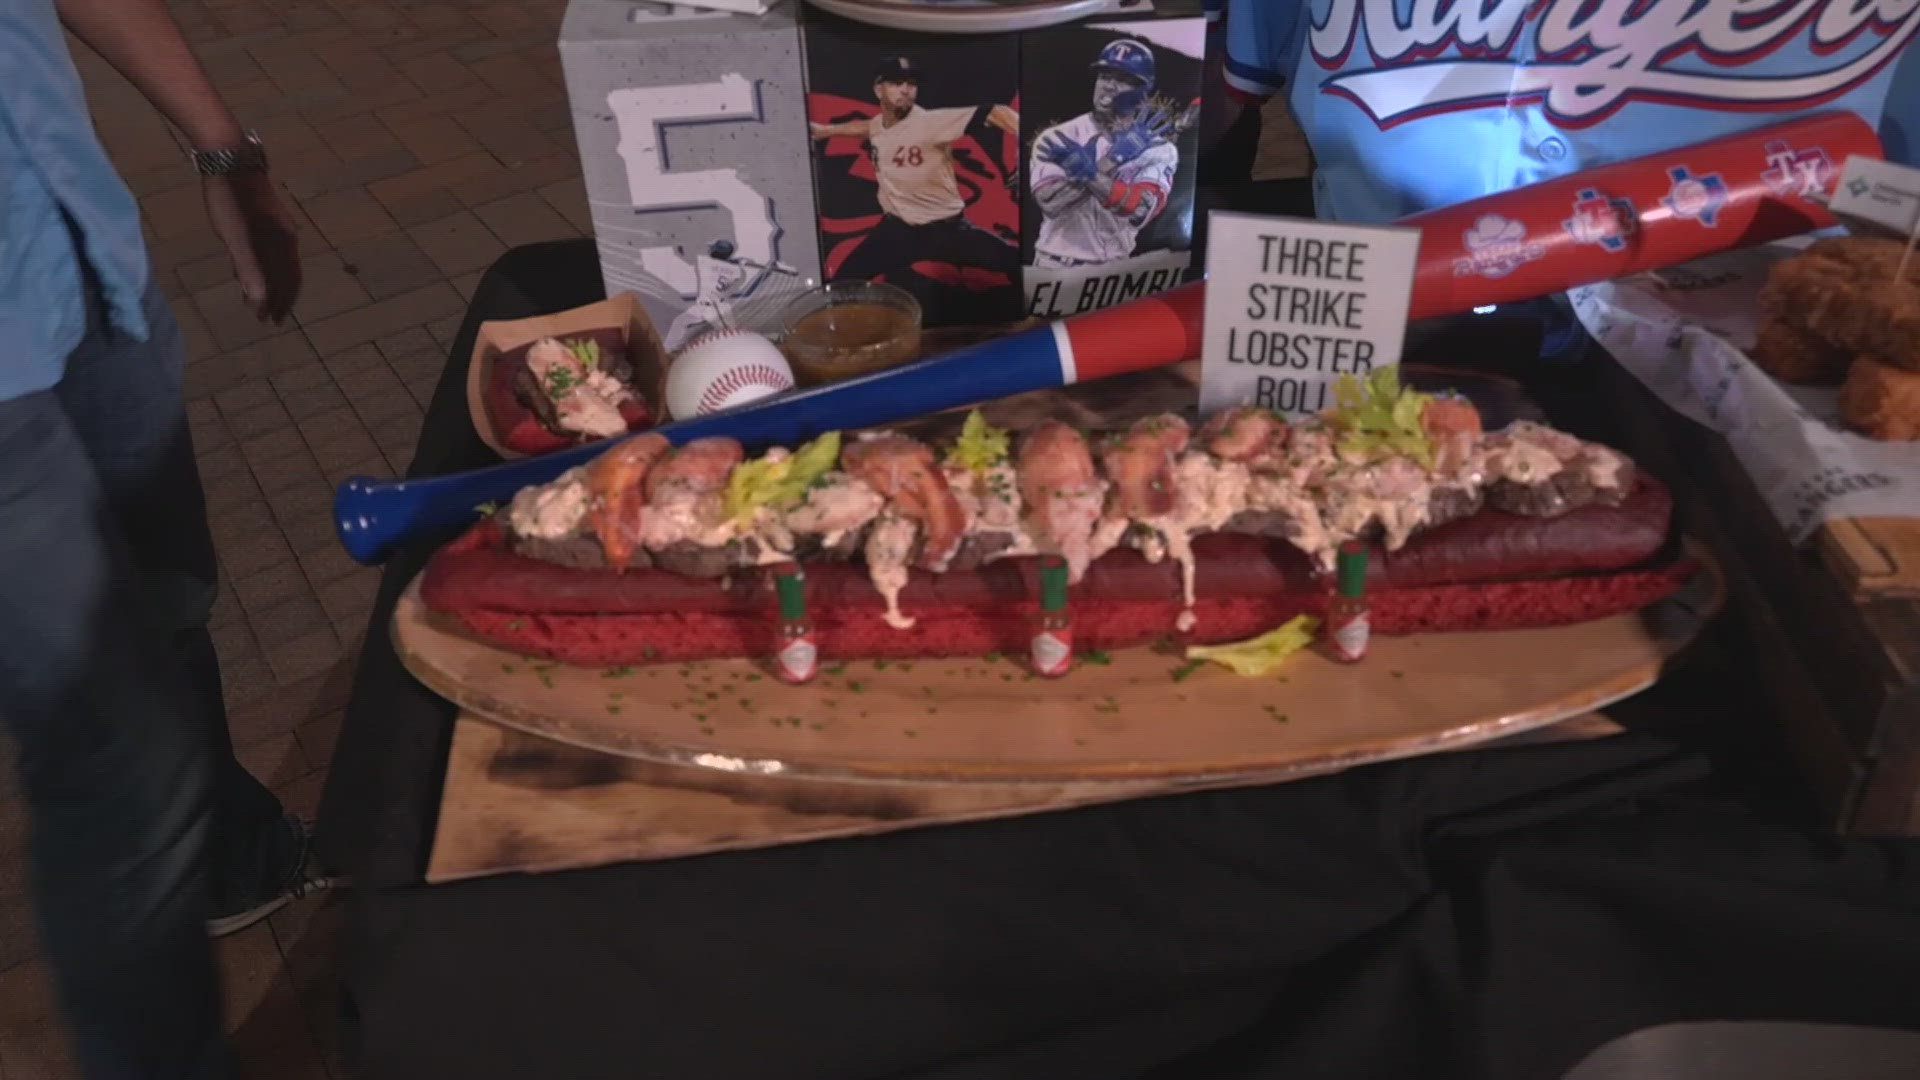 Here's the newest creation this playoff run: Three Strike Lobster Roll.